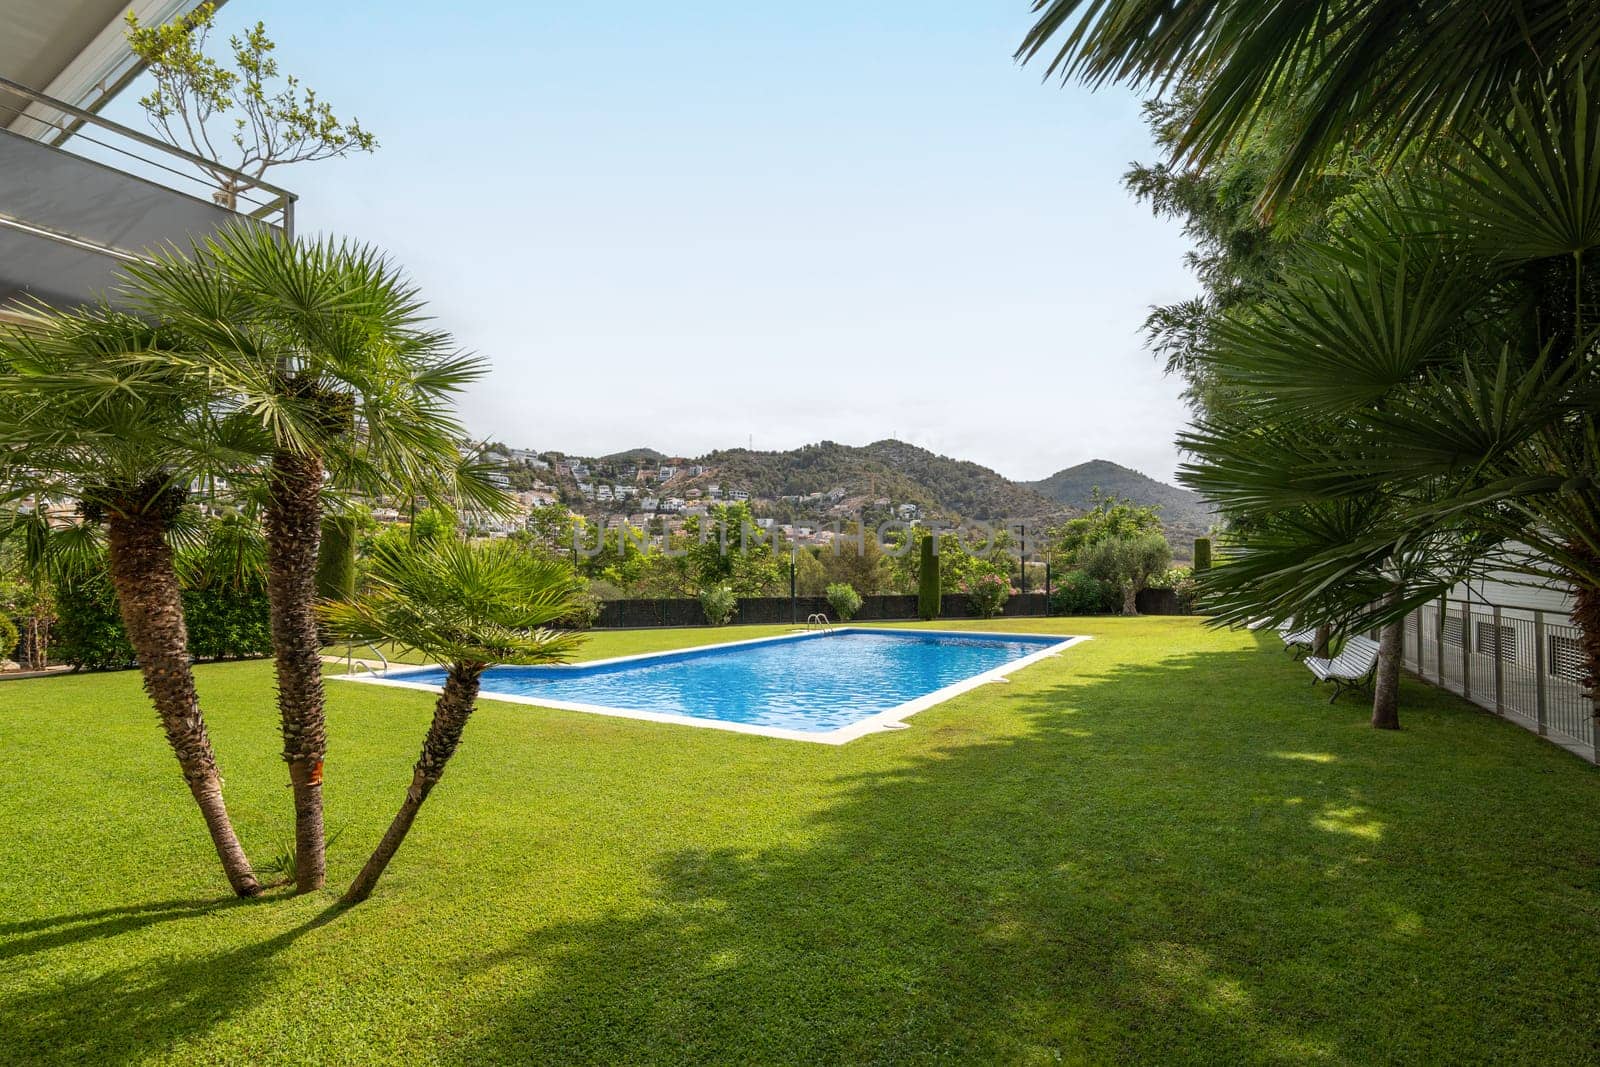 Lush garden with a swimming pool and palm trees with hills in the background by apavlin